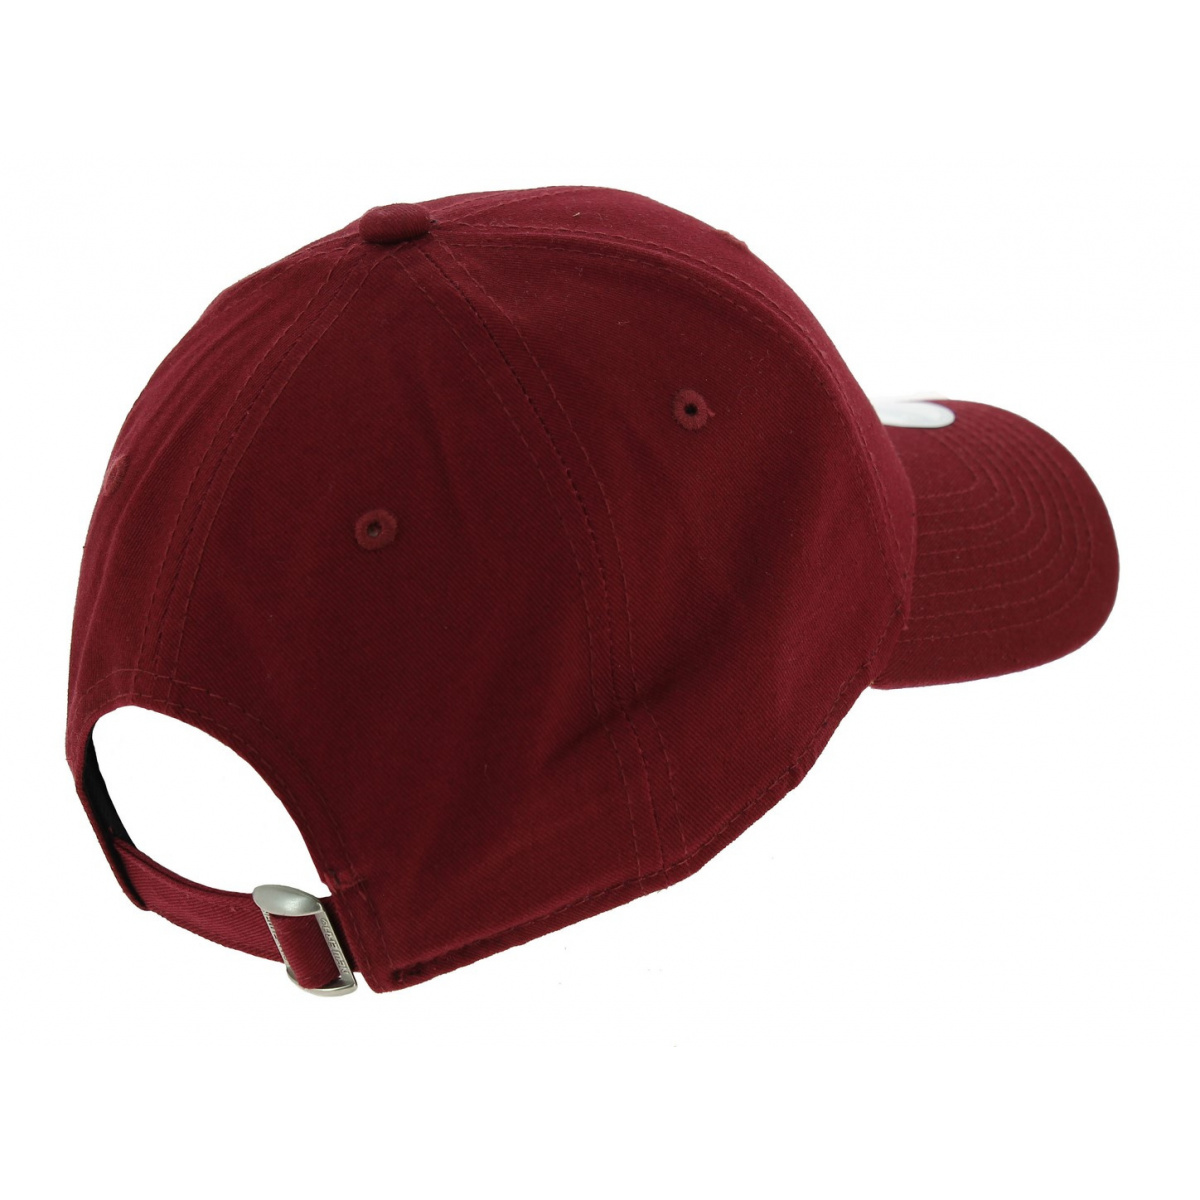 Traclet Era Bordeaux Baseball Chapellerie - : 7716 940 NY Reference Essential New Cap |